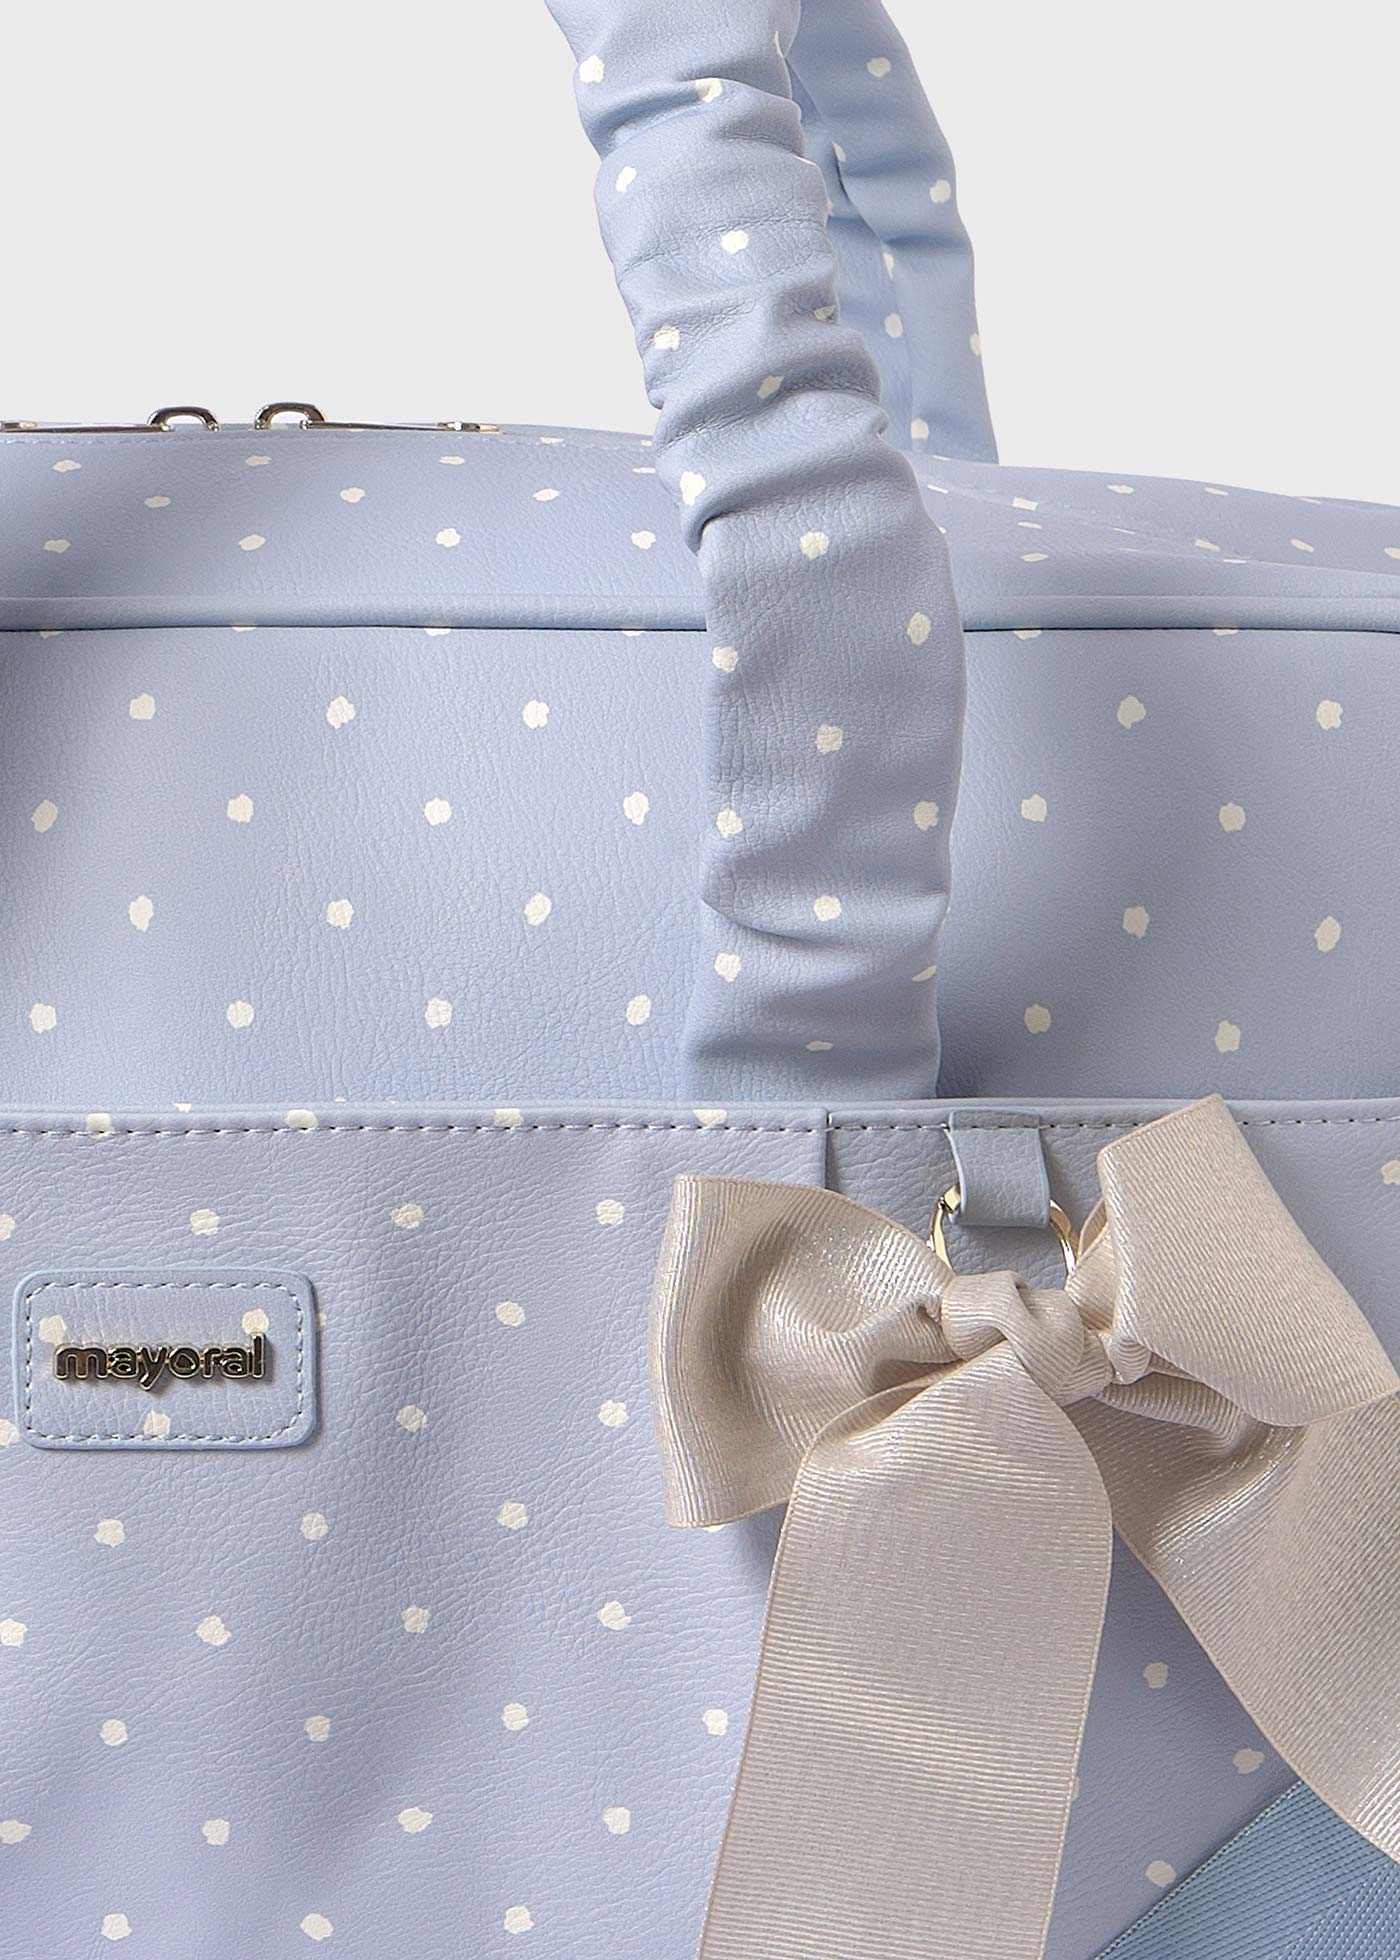 The Polka Mommy Bag (Blue Dots)